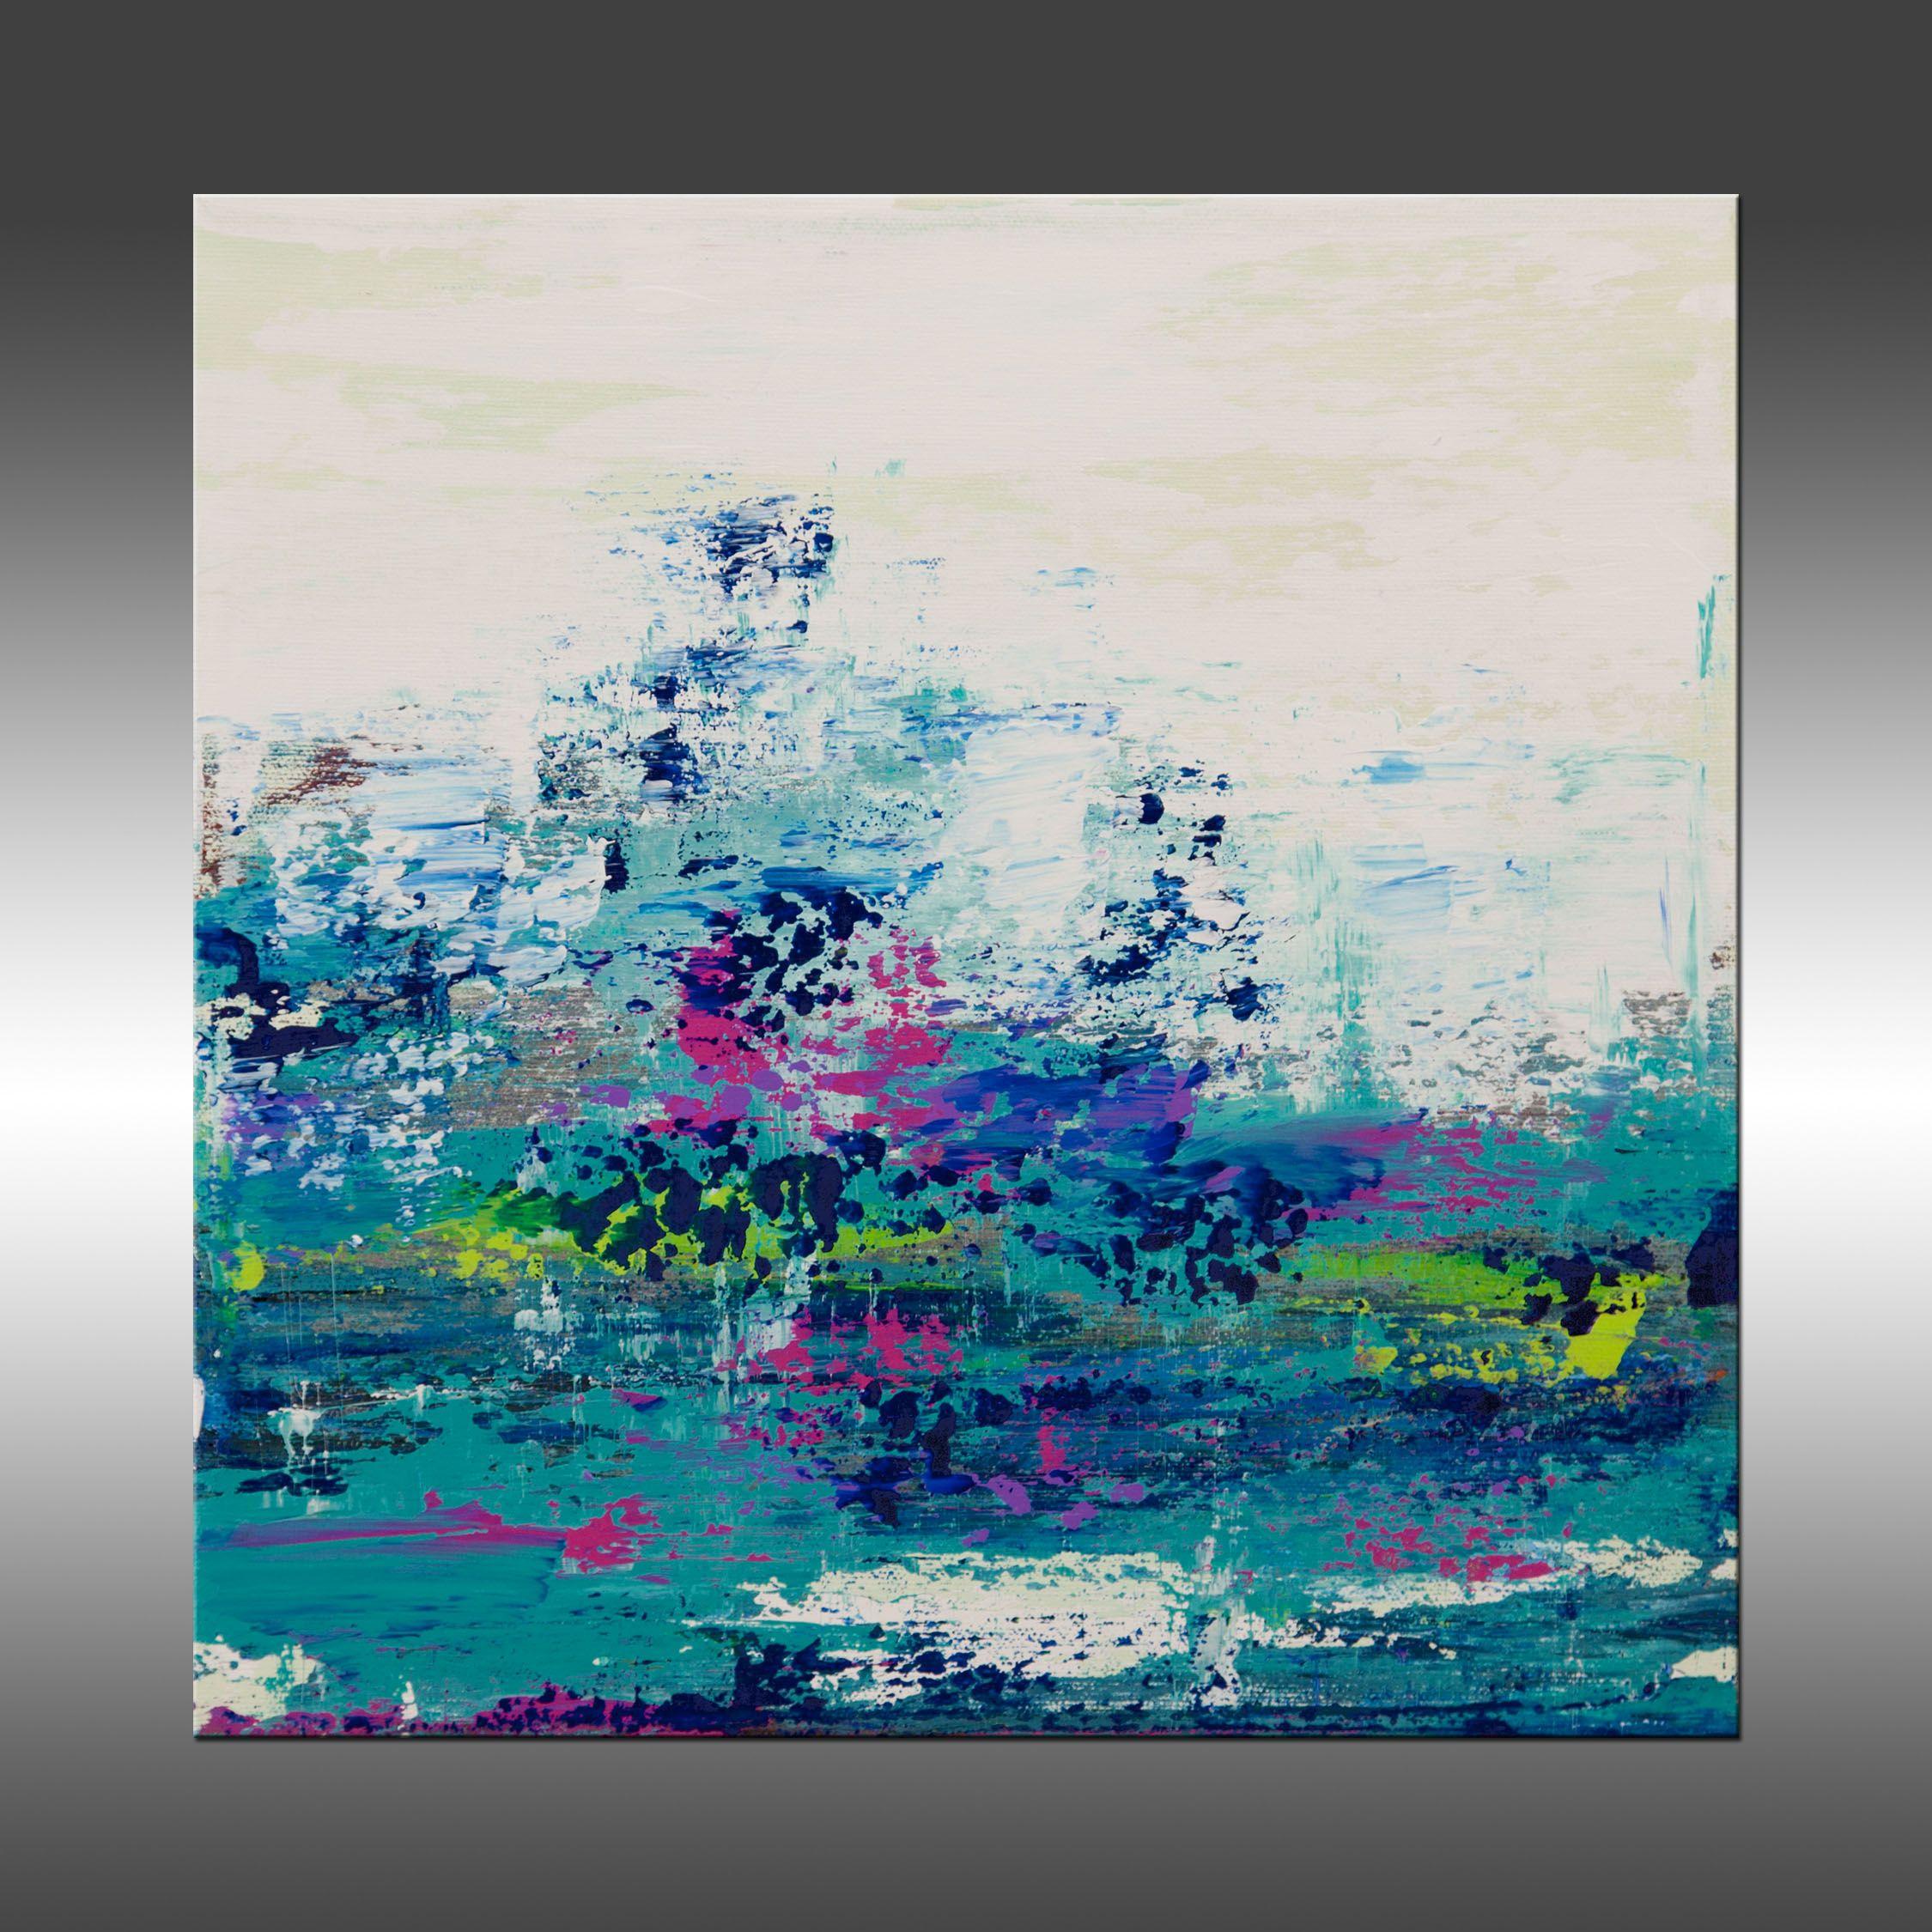 Ascension 11 is an original painting, created with acrylic paint on gallery-wrapped canvas. It has a width of 12 inches and a height of 12 inches with a depth of 1.5 inches (12x12x1.5).    The colors used in the painting are teal, white, blue,